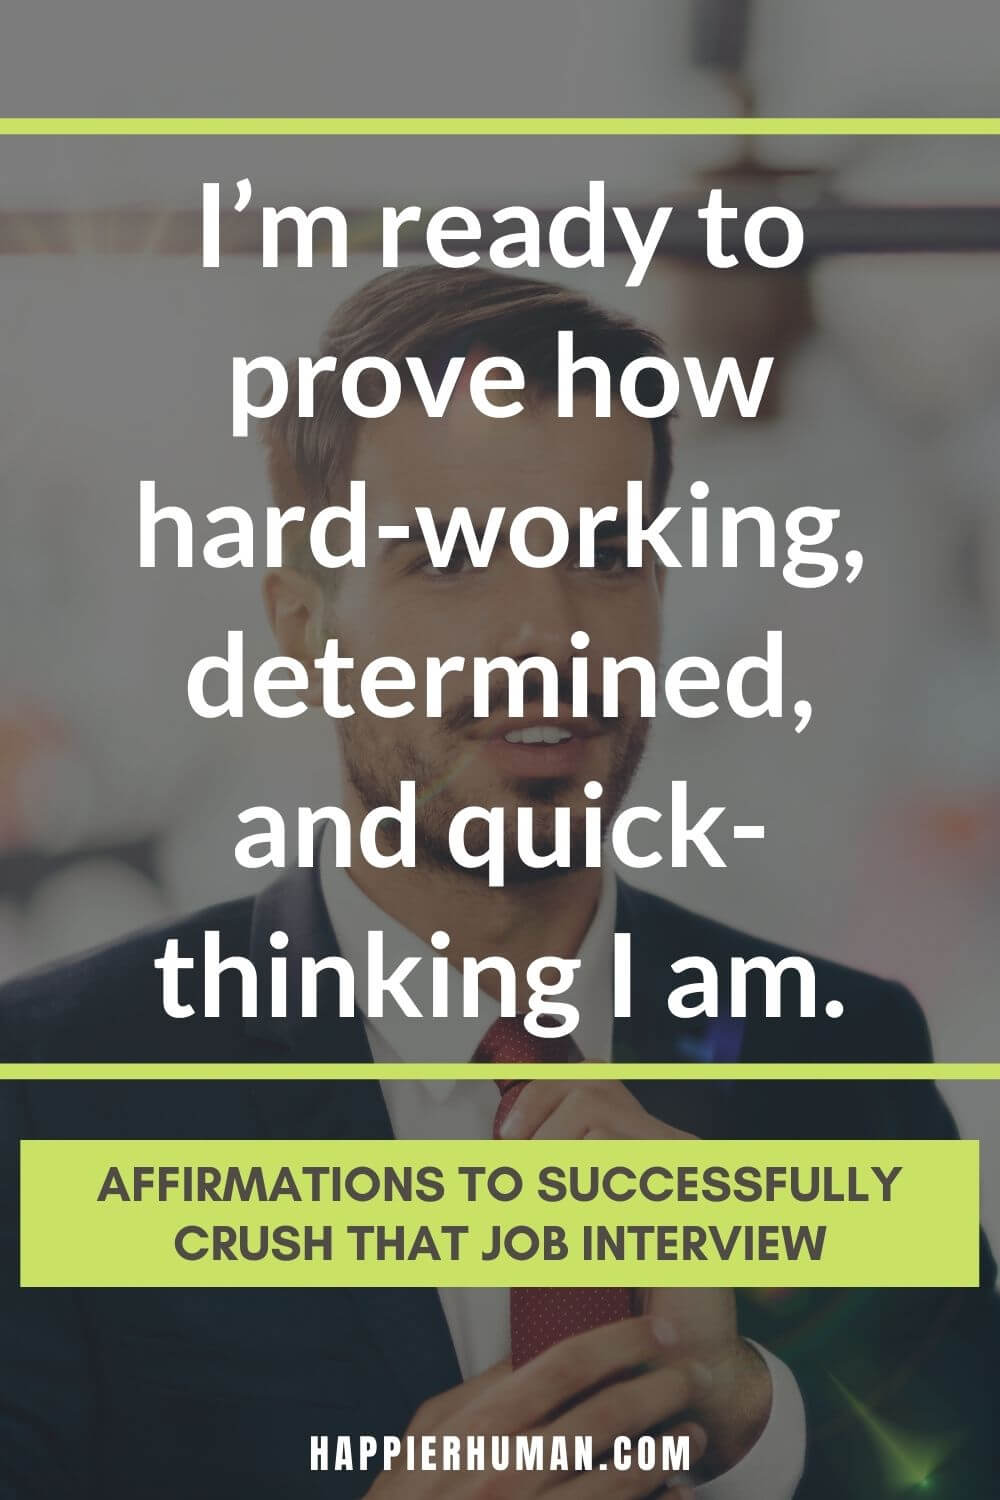 Affirmations for Job Interview - I’m ready to prove how hard-working, determined, and quick-thinking I am. | job interview confidence quotes | job interview questions | positive affirmations